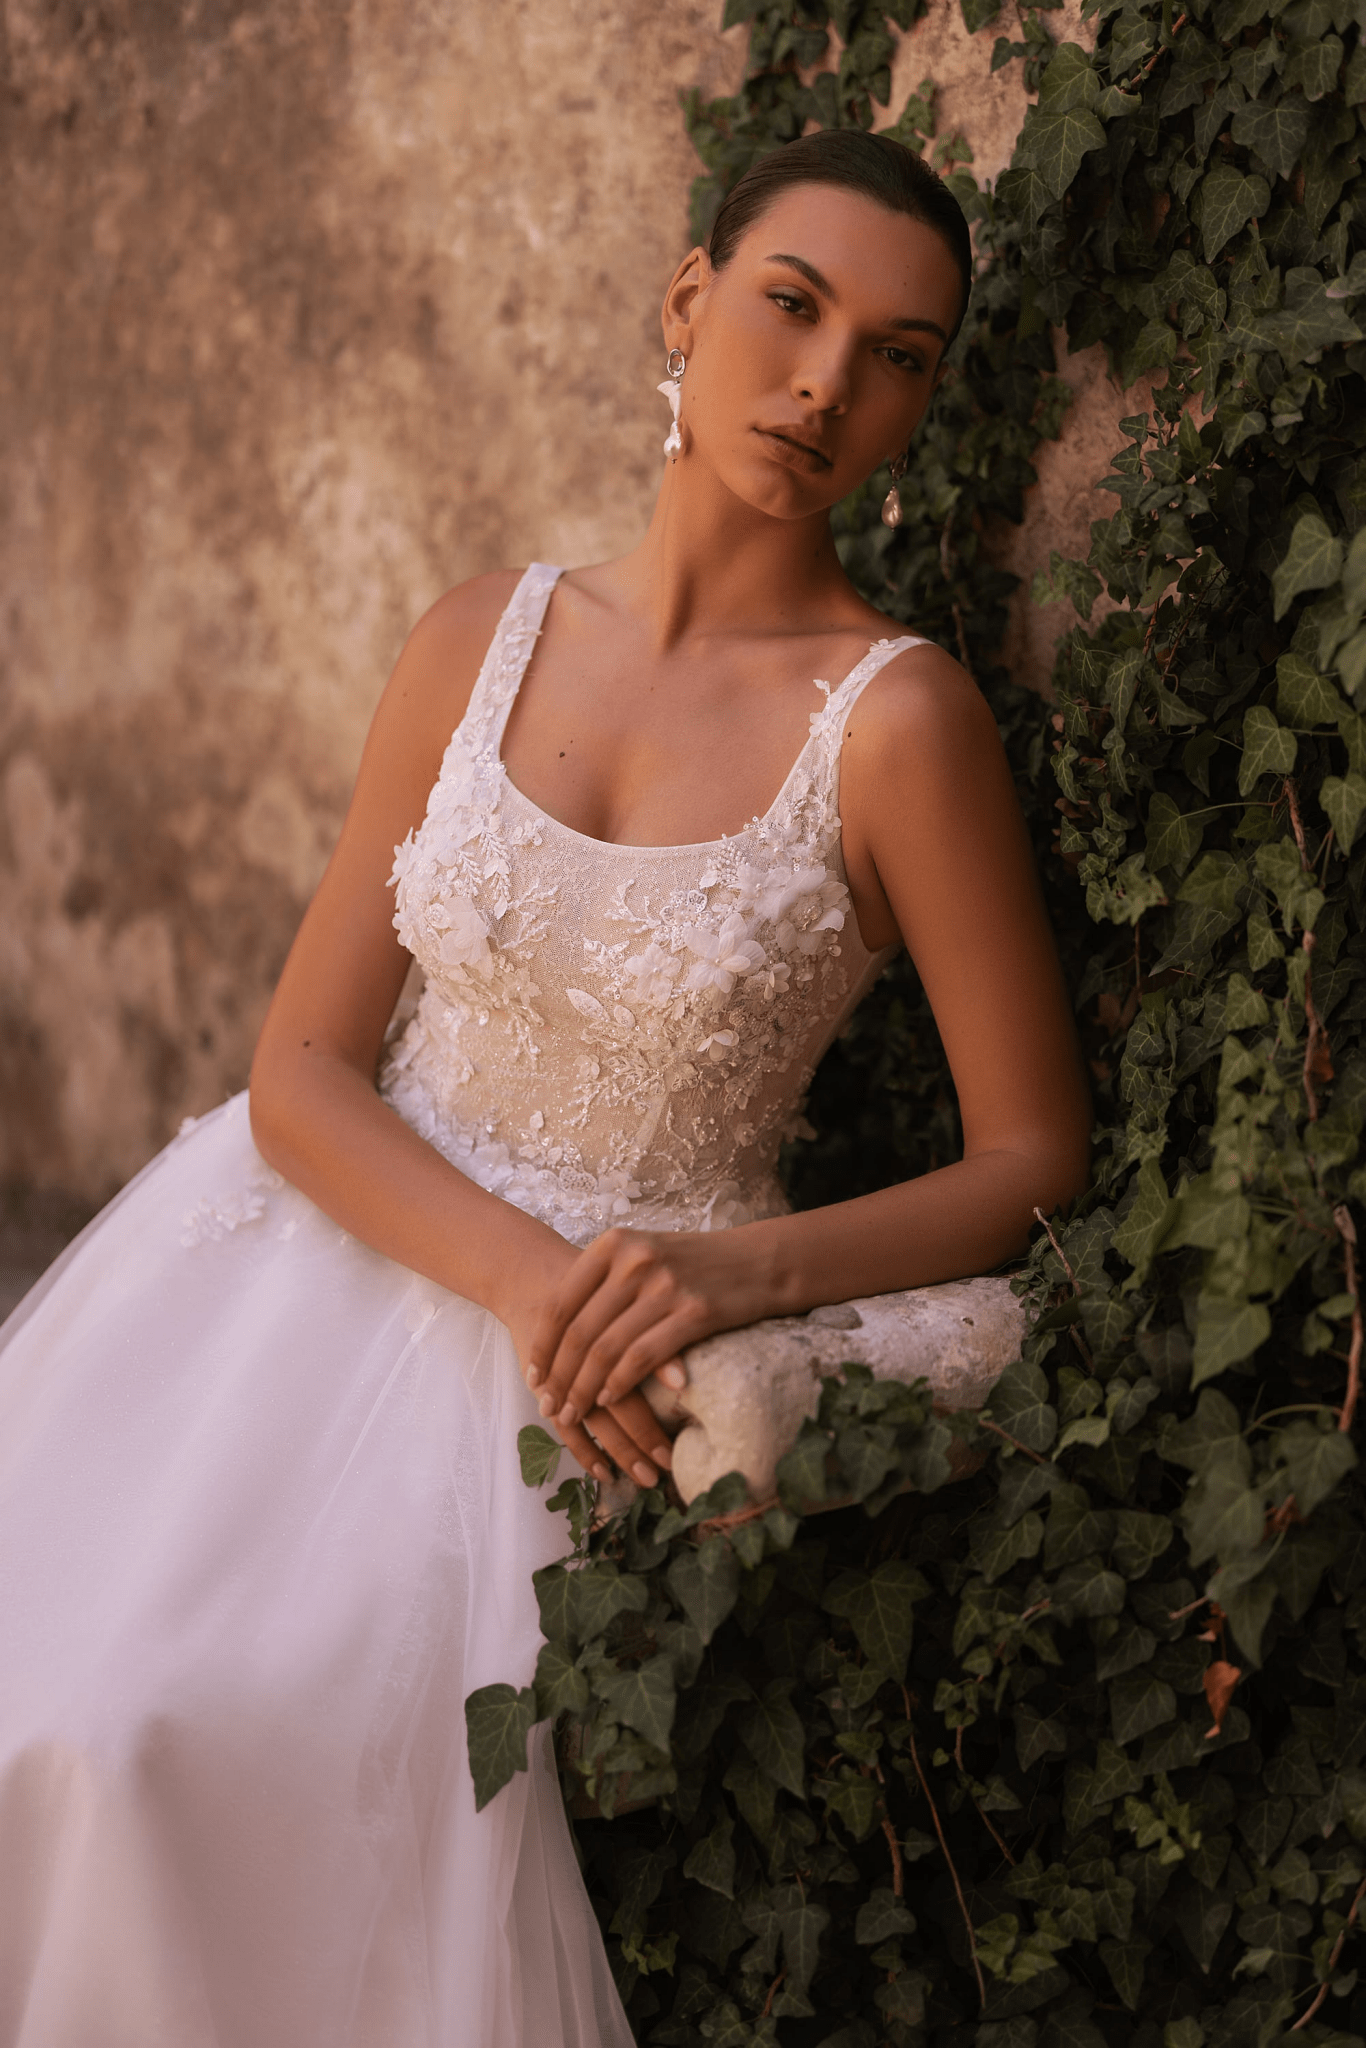 Romantic A-Line Wedding Gown with Sequined Floral Appliqué - Sleeveless Wedding Dress Plus Size - WonderlandByLilian